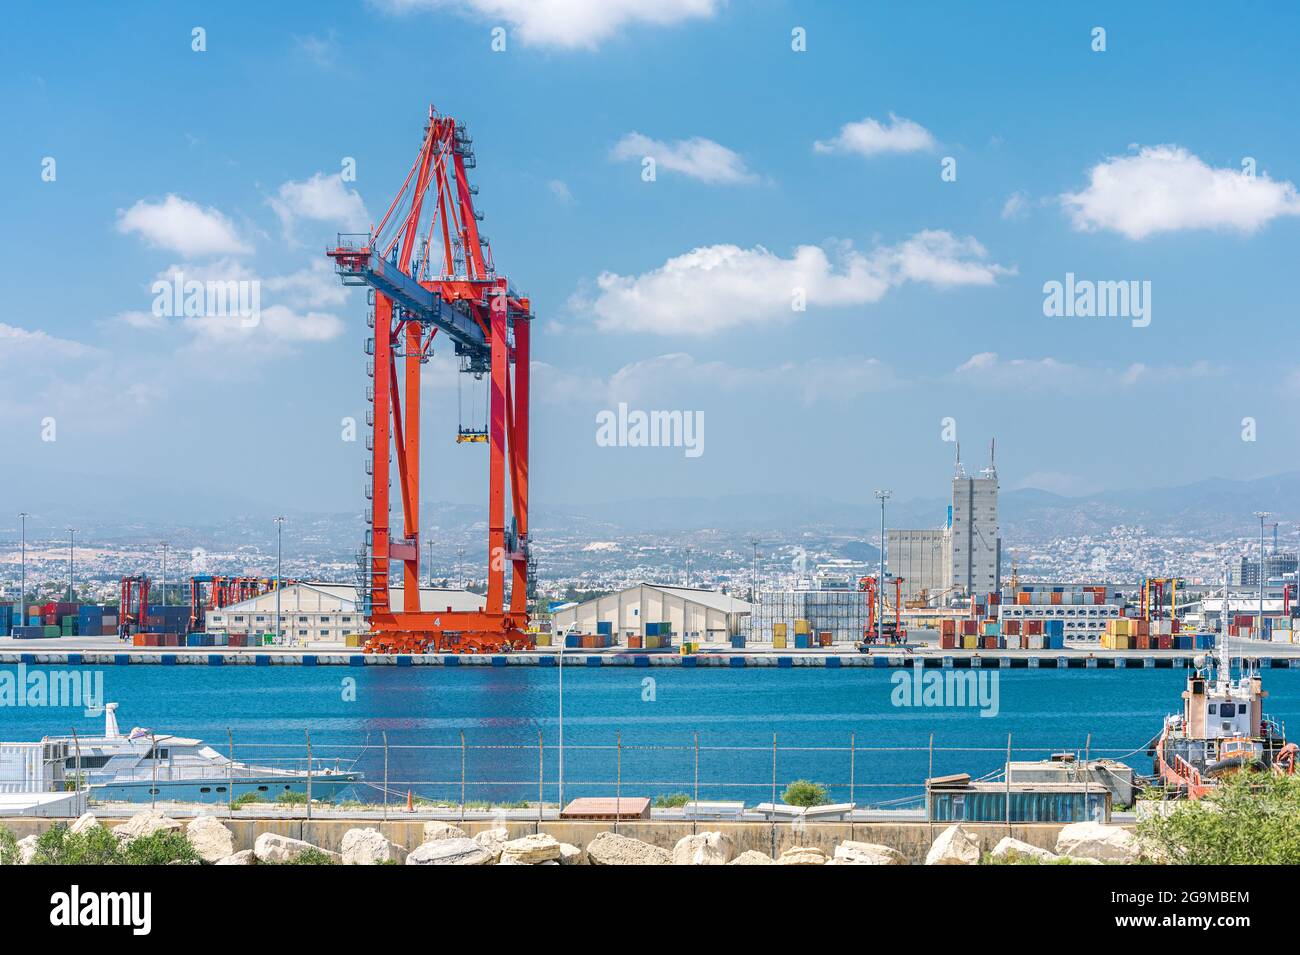 Ship to shore gantry crane and container warehouse in Limassol cargo port, Cyprus Stock Photo